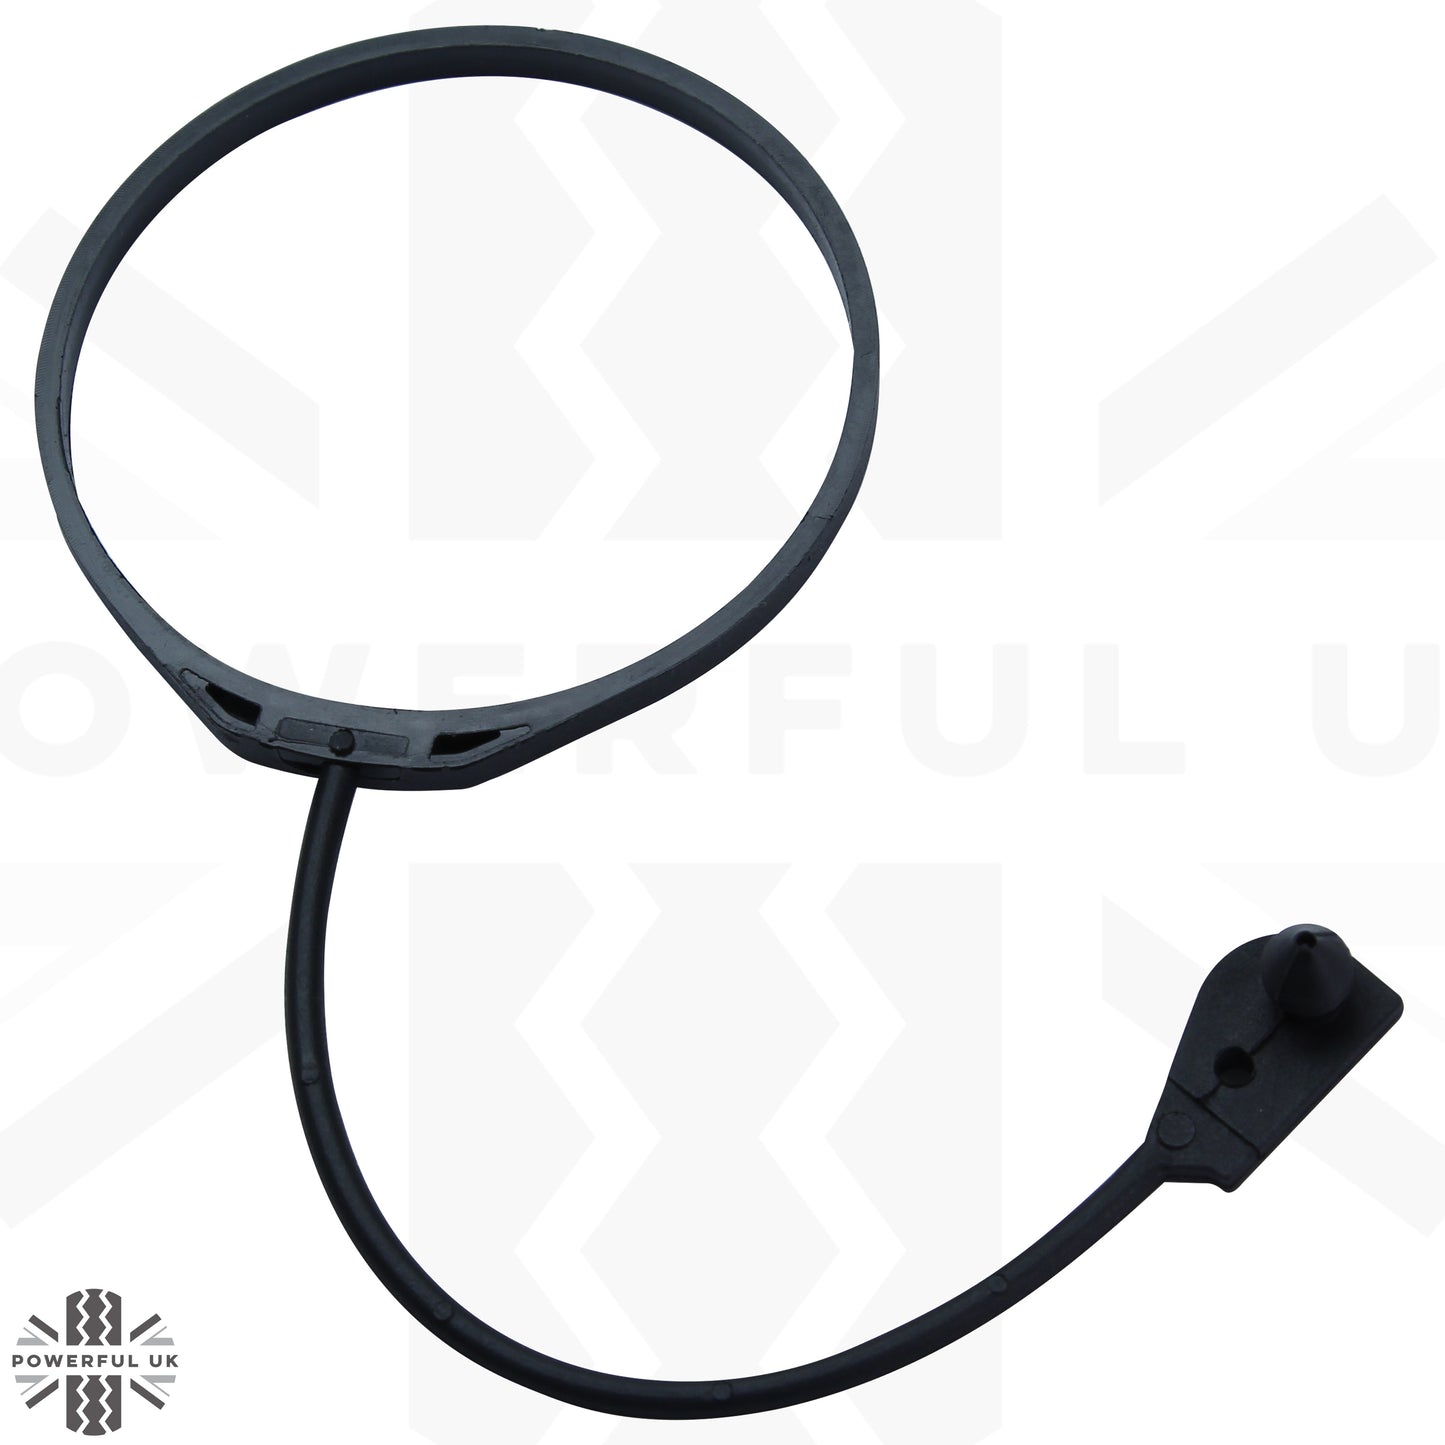 Replacement Fuel Filler Cap Tether Strap for Land Rover Discovery 5